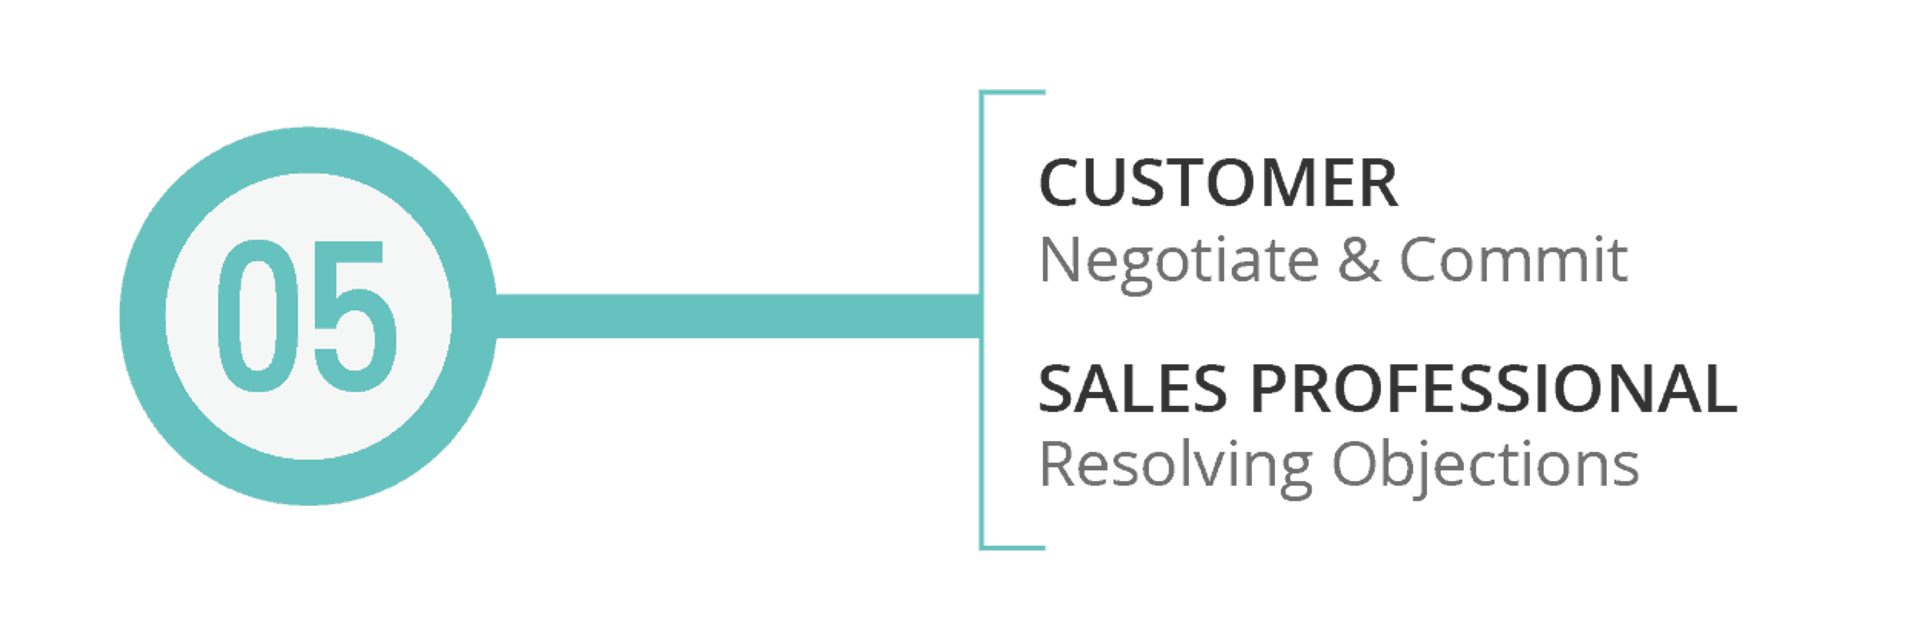 sales cycle & buyer journey step 5